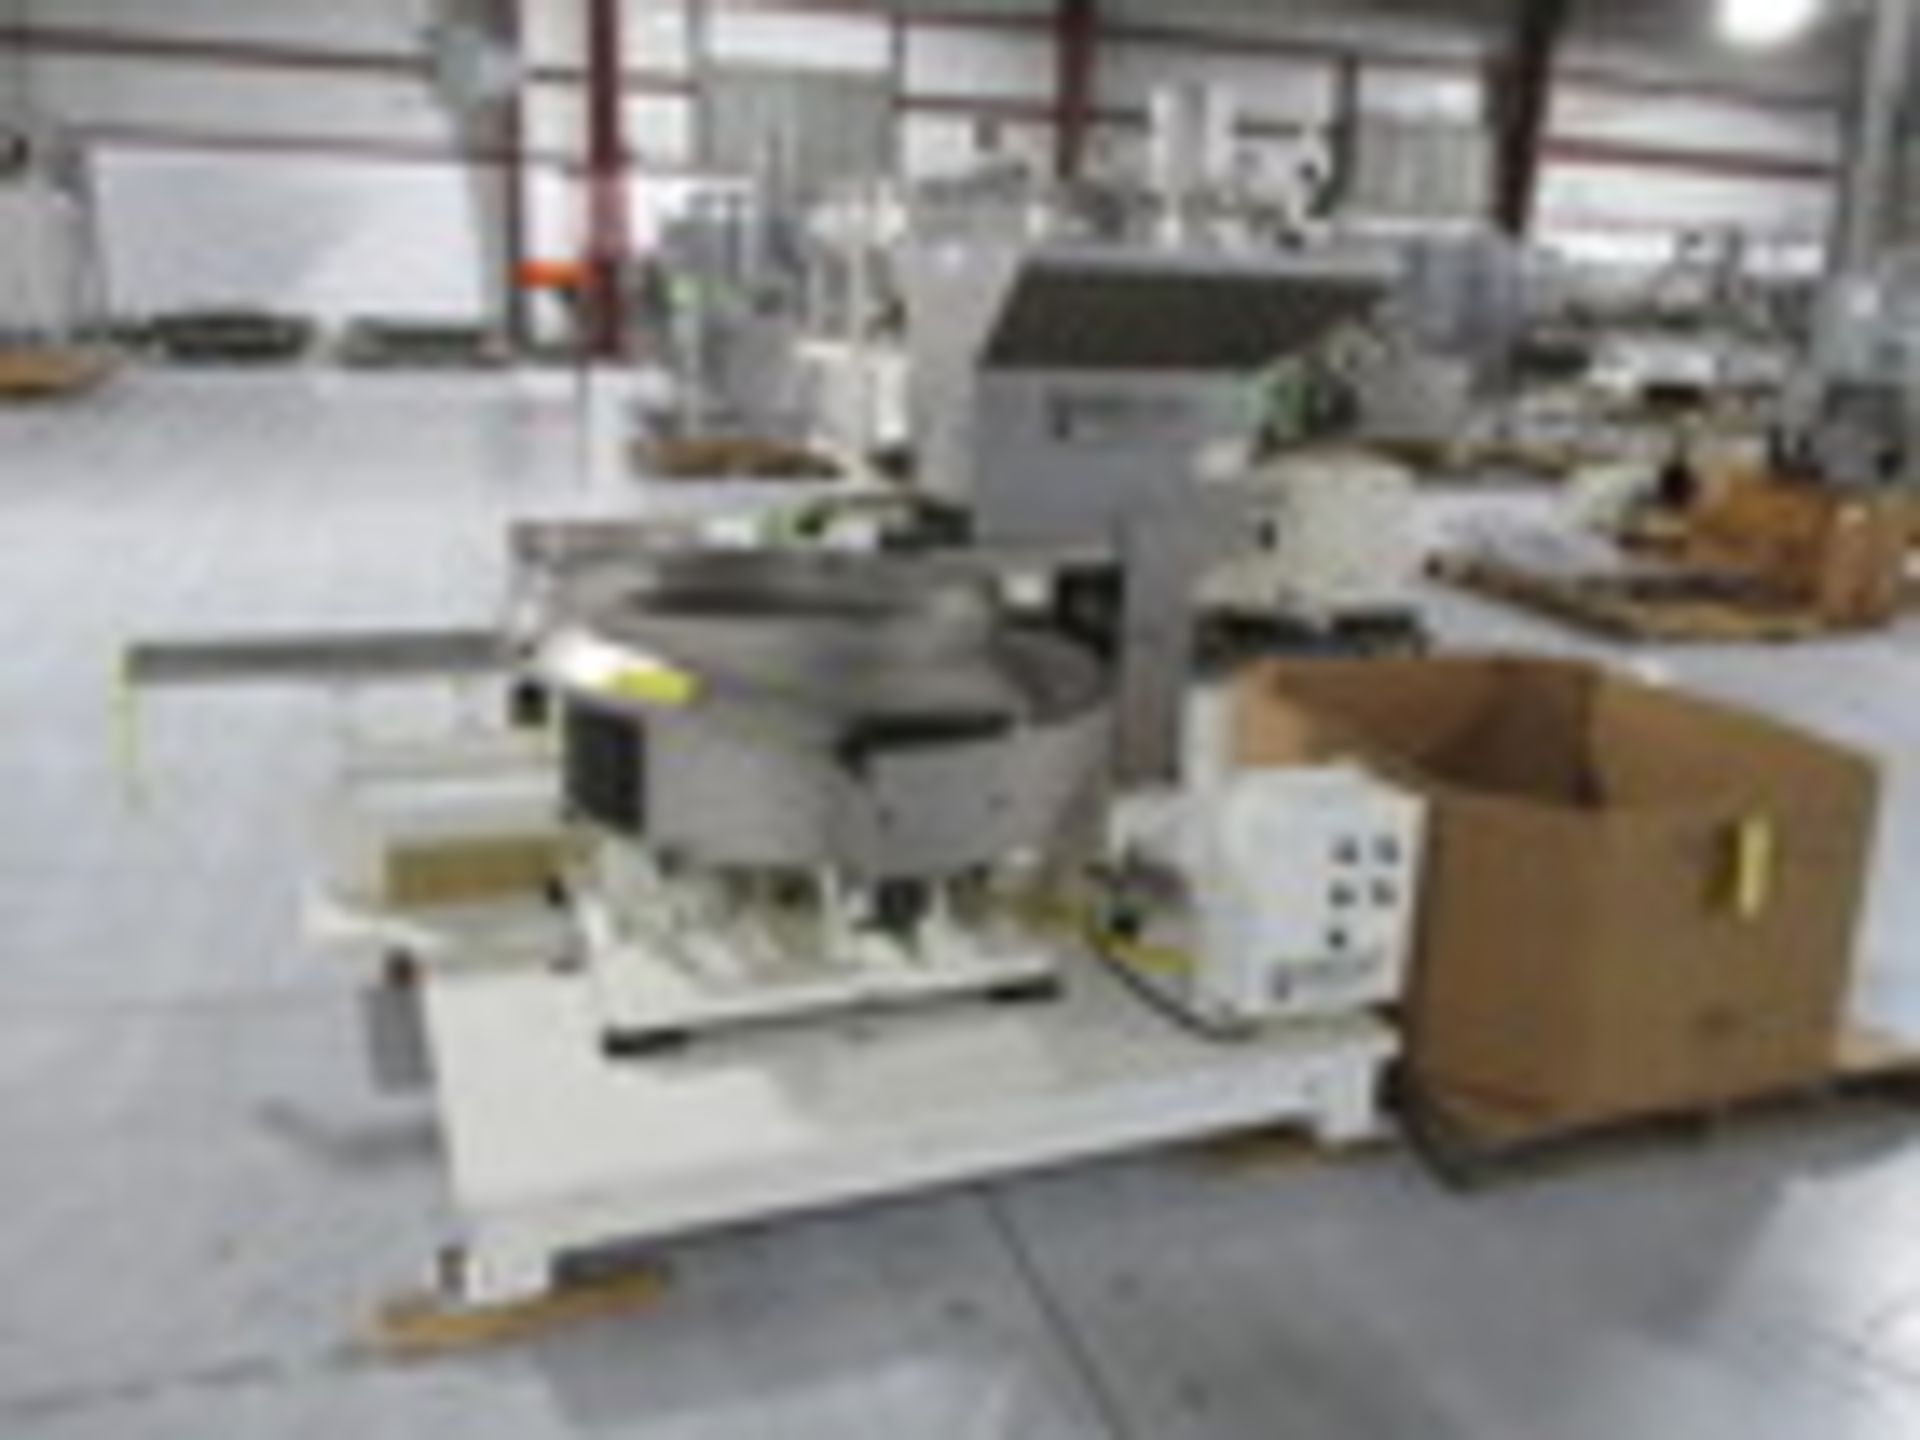 Moorfeed 30" S/S Vibratory Feeder System, Year 2003 - Image 2 of 3